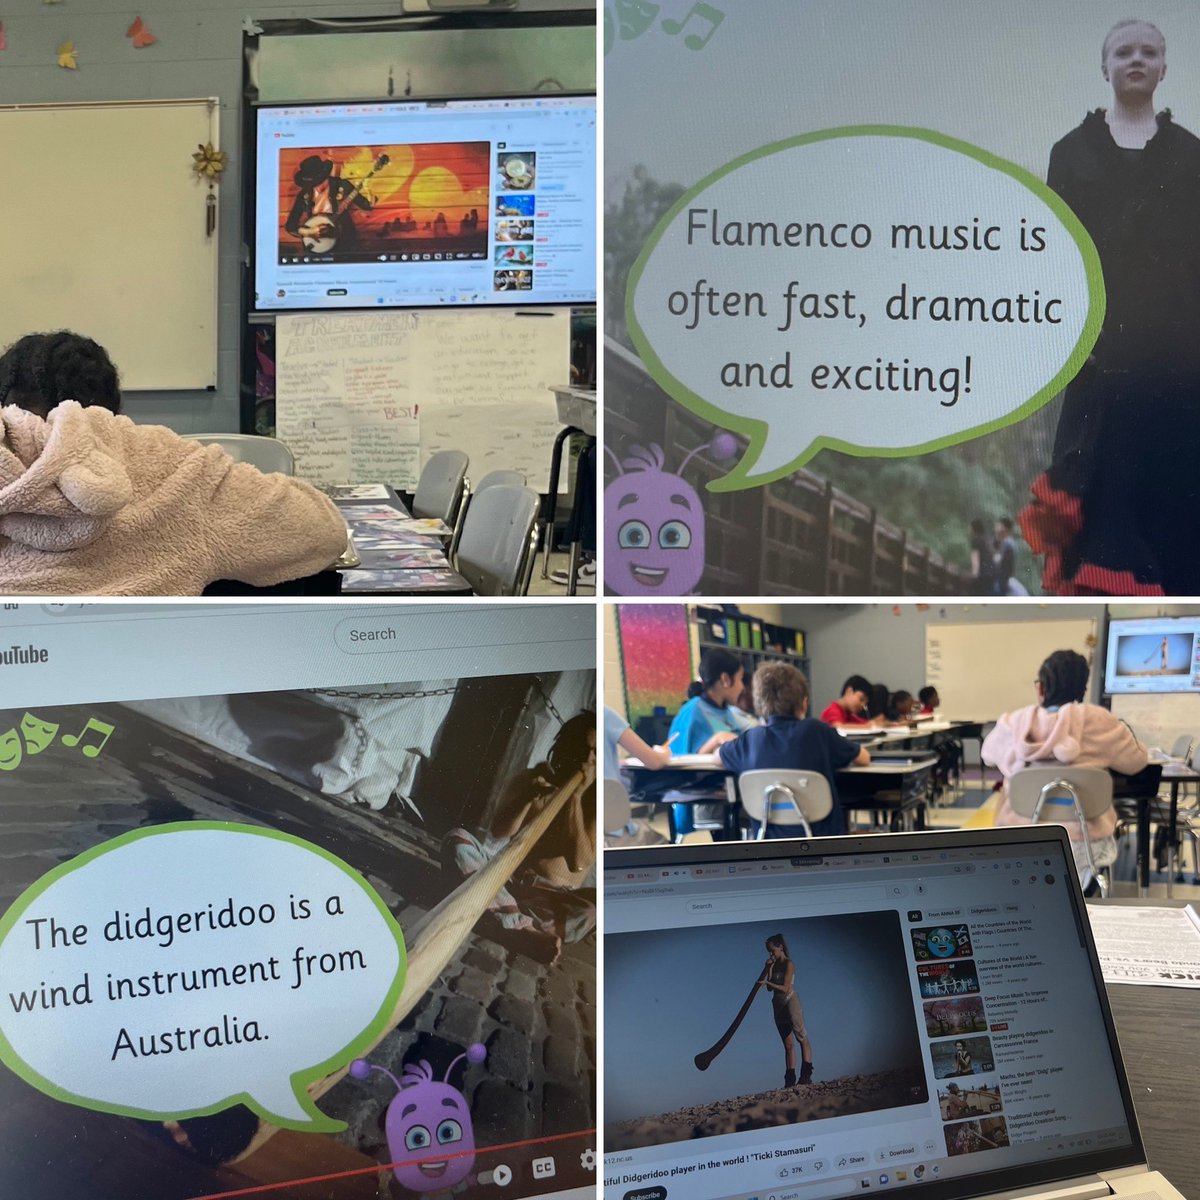 Here @WHOwenES 4th graders made Intercultural Understanding by discussing types of music and dance around the world! We made connections that make us appreciate differences around our world! 
#GlobalLeaders
#UnitingOurWorld
@ParticipateLrng